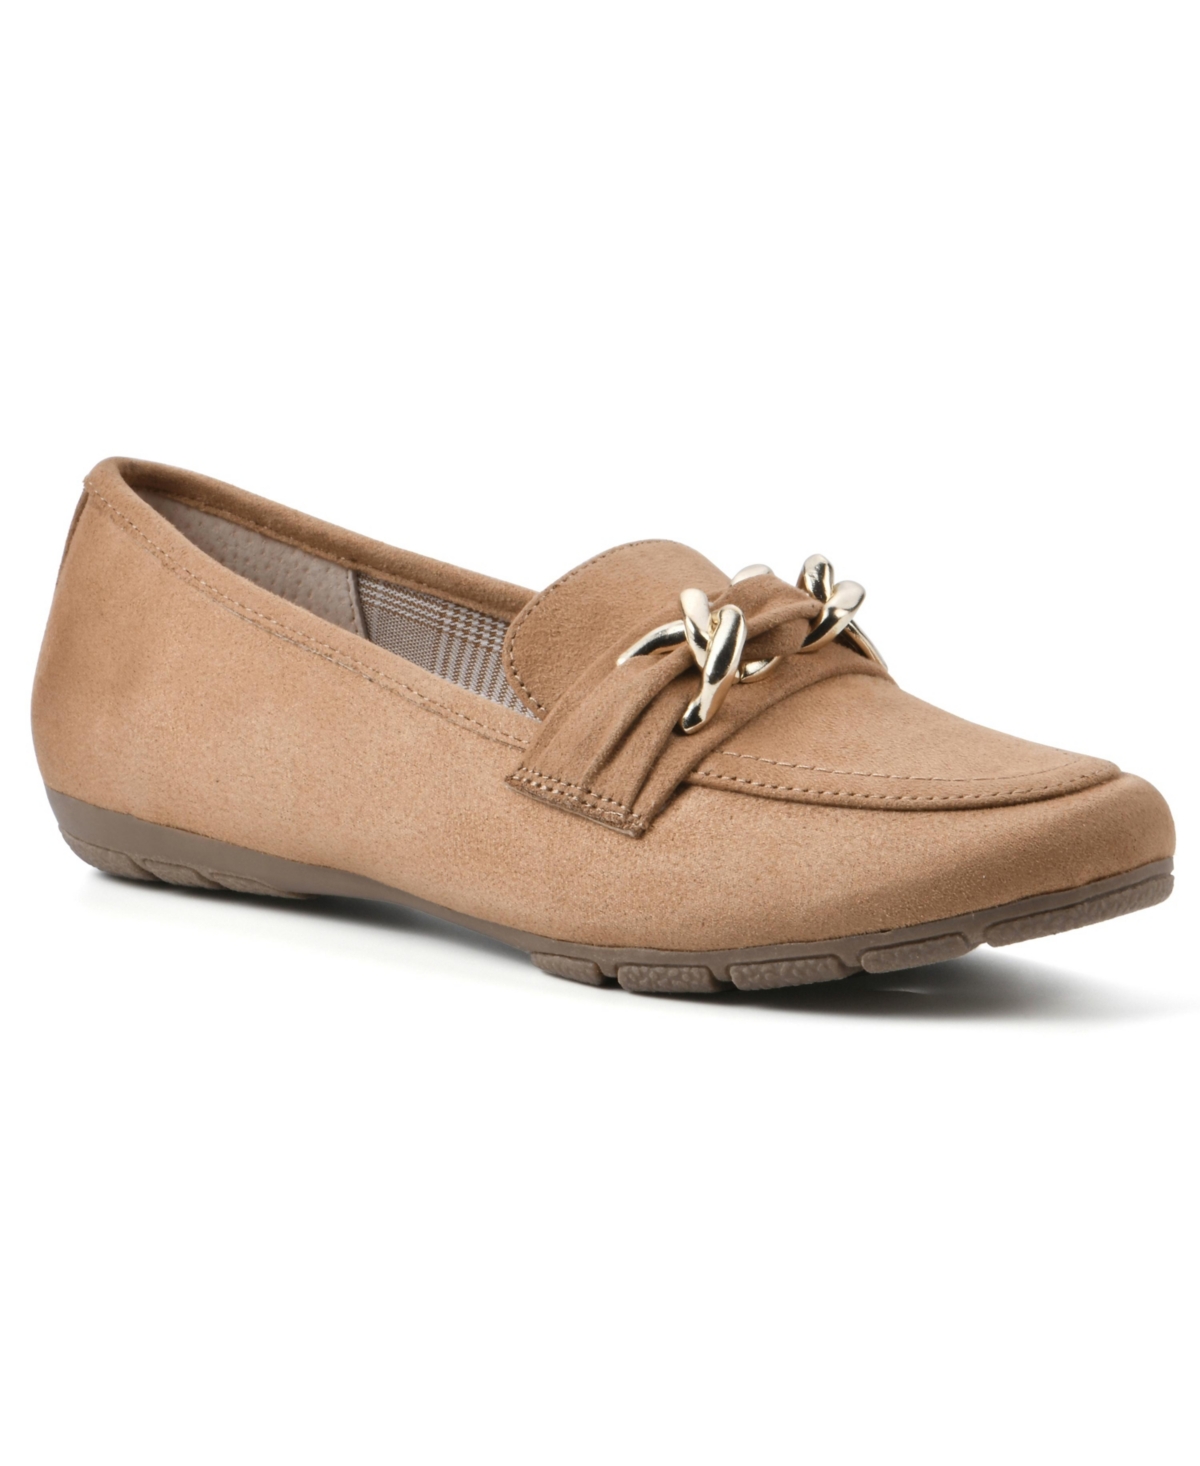 CLIFFS BY WHITE MOUNTAIN WOMEN'S GAINFUL LOAFERS